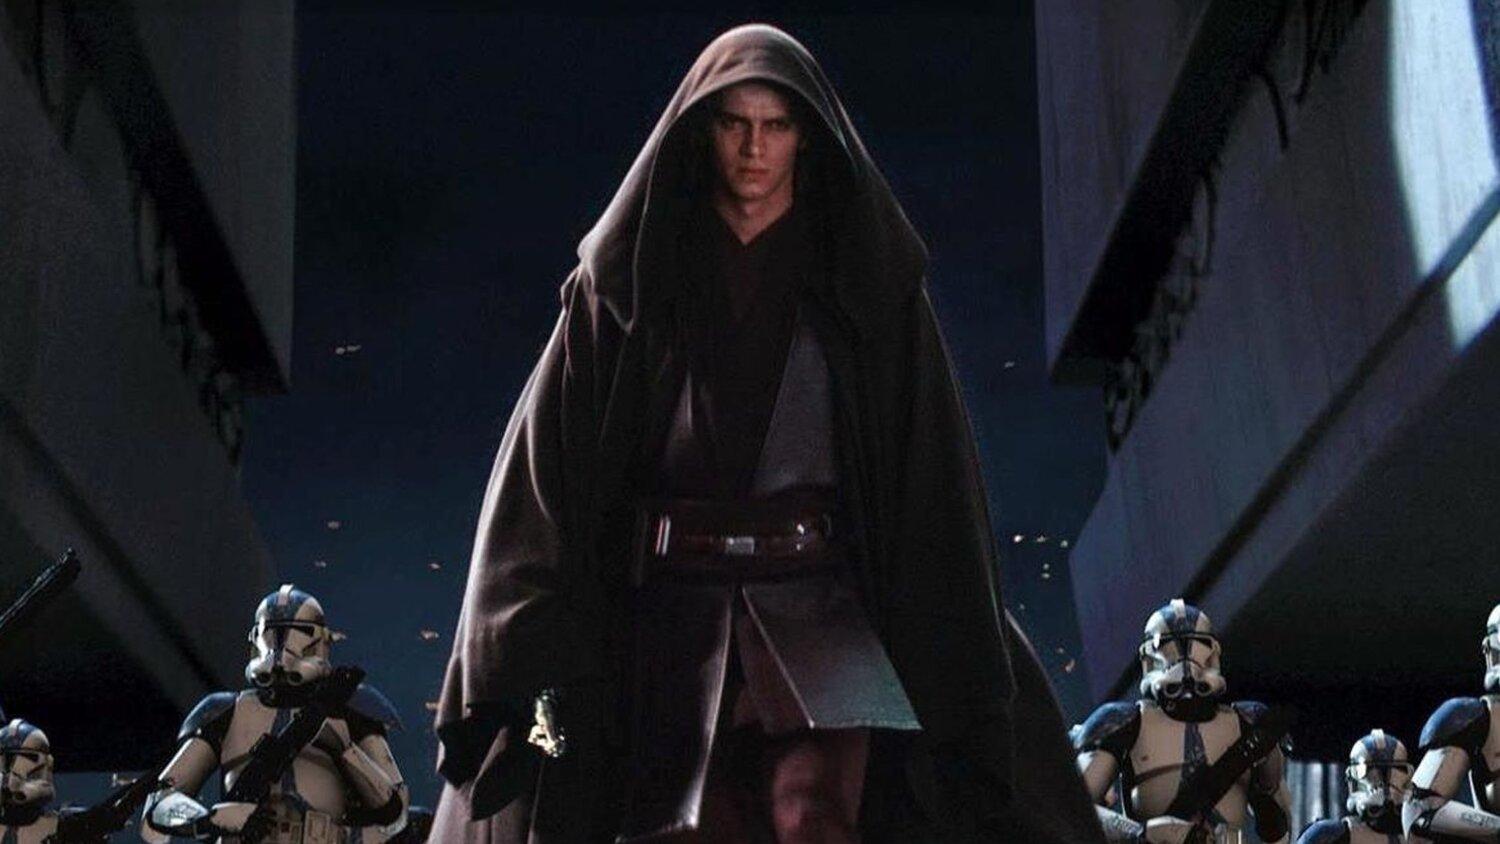 Star Wars Ep. III: Revenge of the Sith instaling